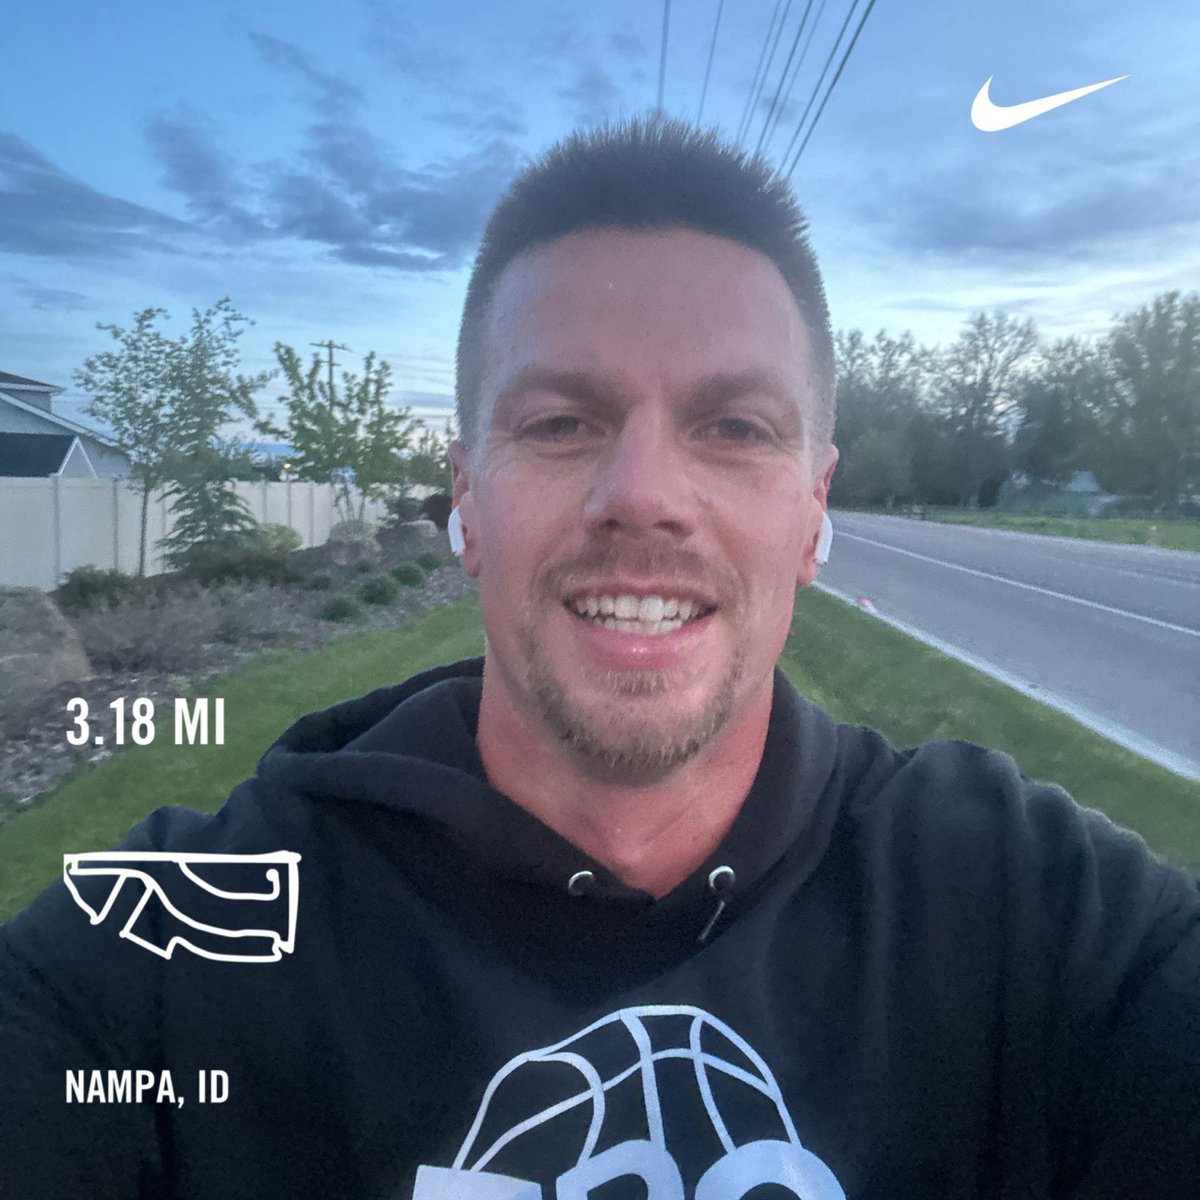 #MissionComplete with a 5K Monday-Friday #NikeRunClub